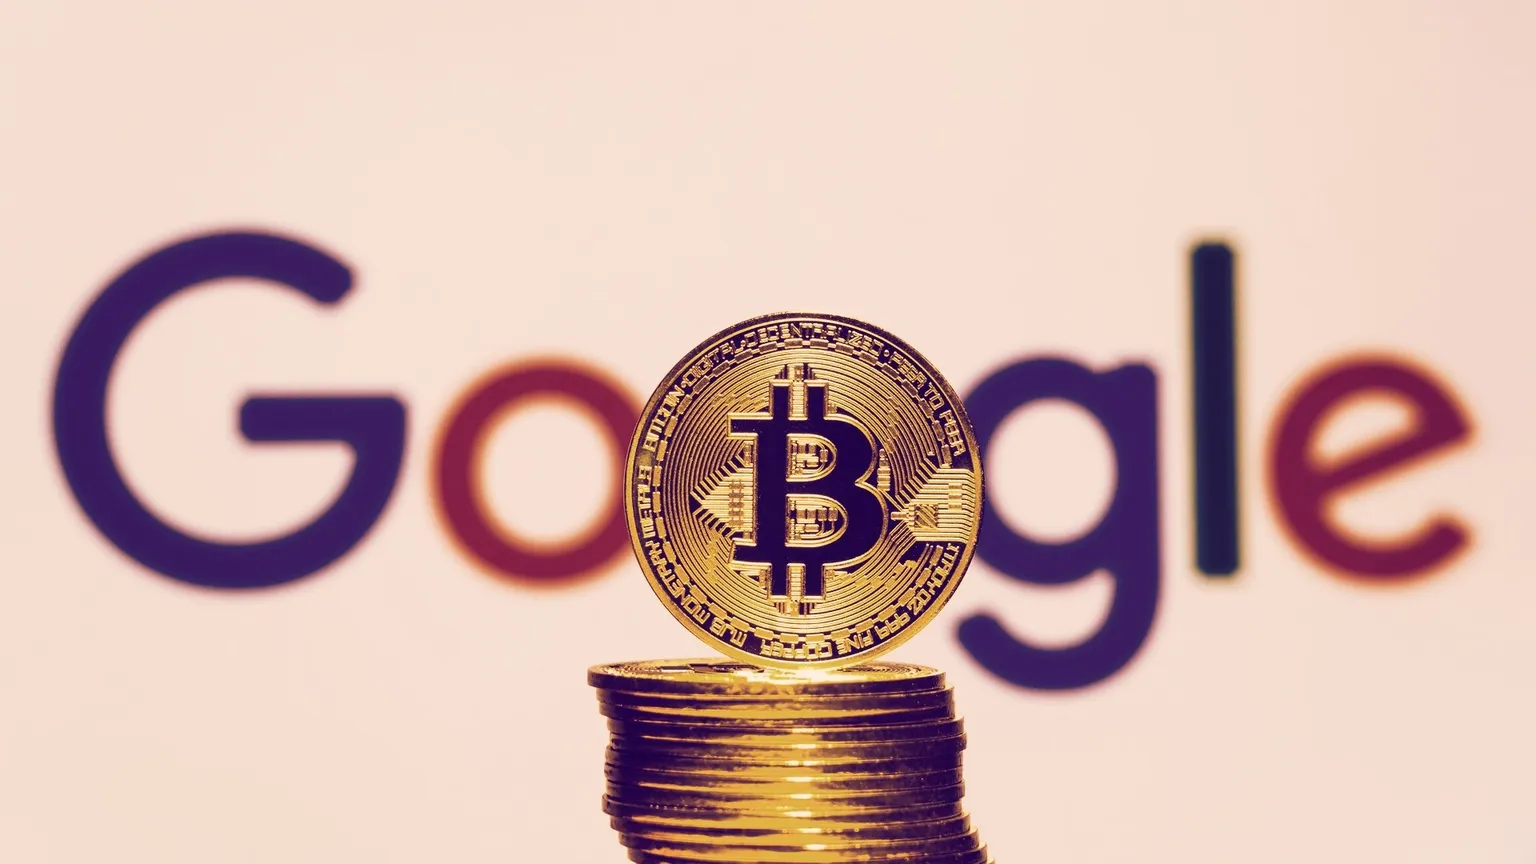 Google has a mixed relationship with Bitcoin and crypto. Image: Shutterstock